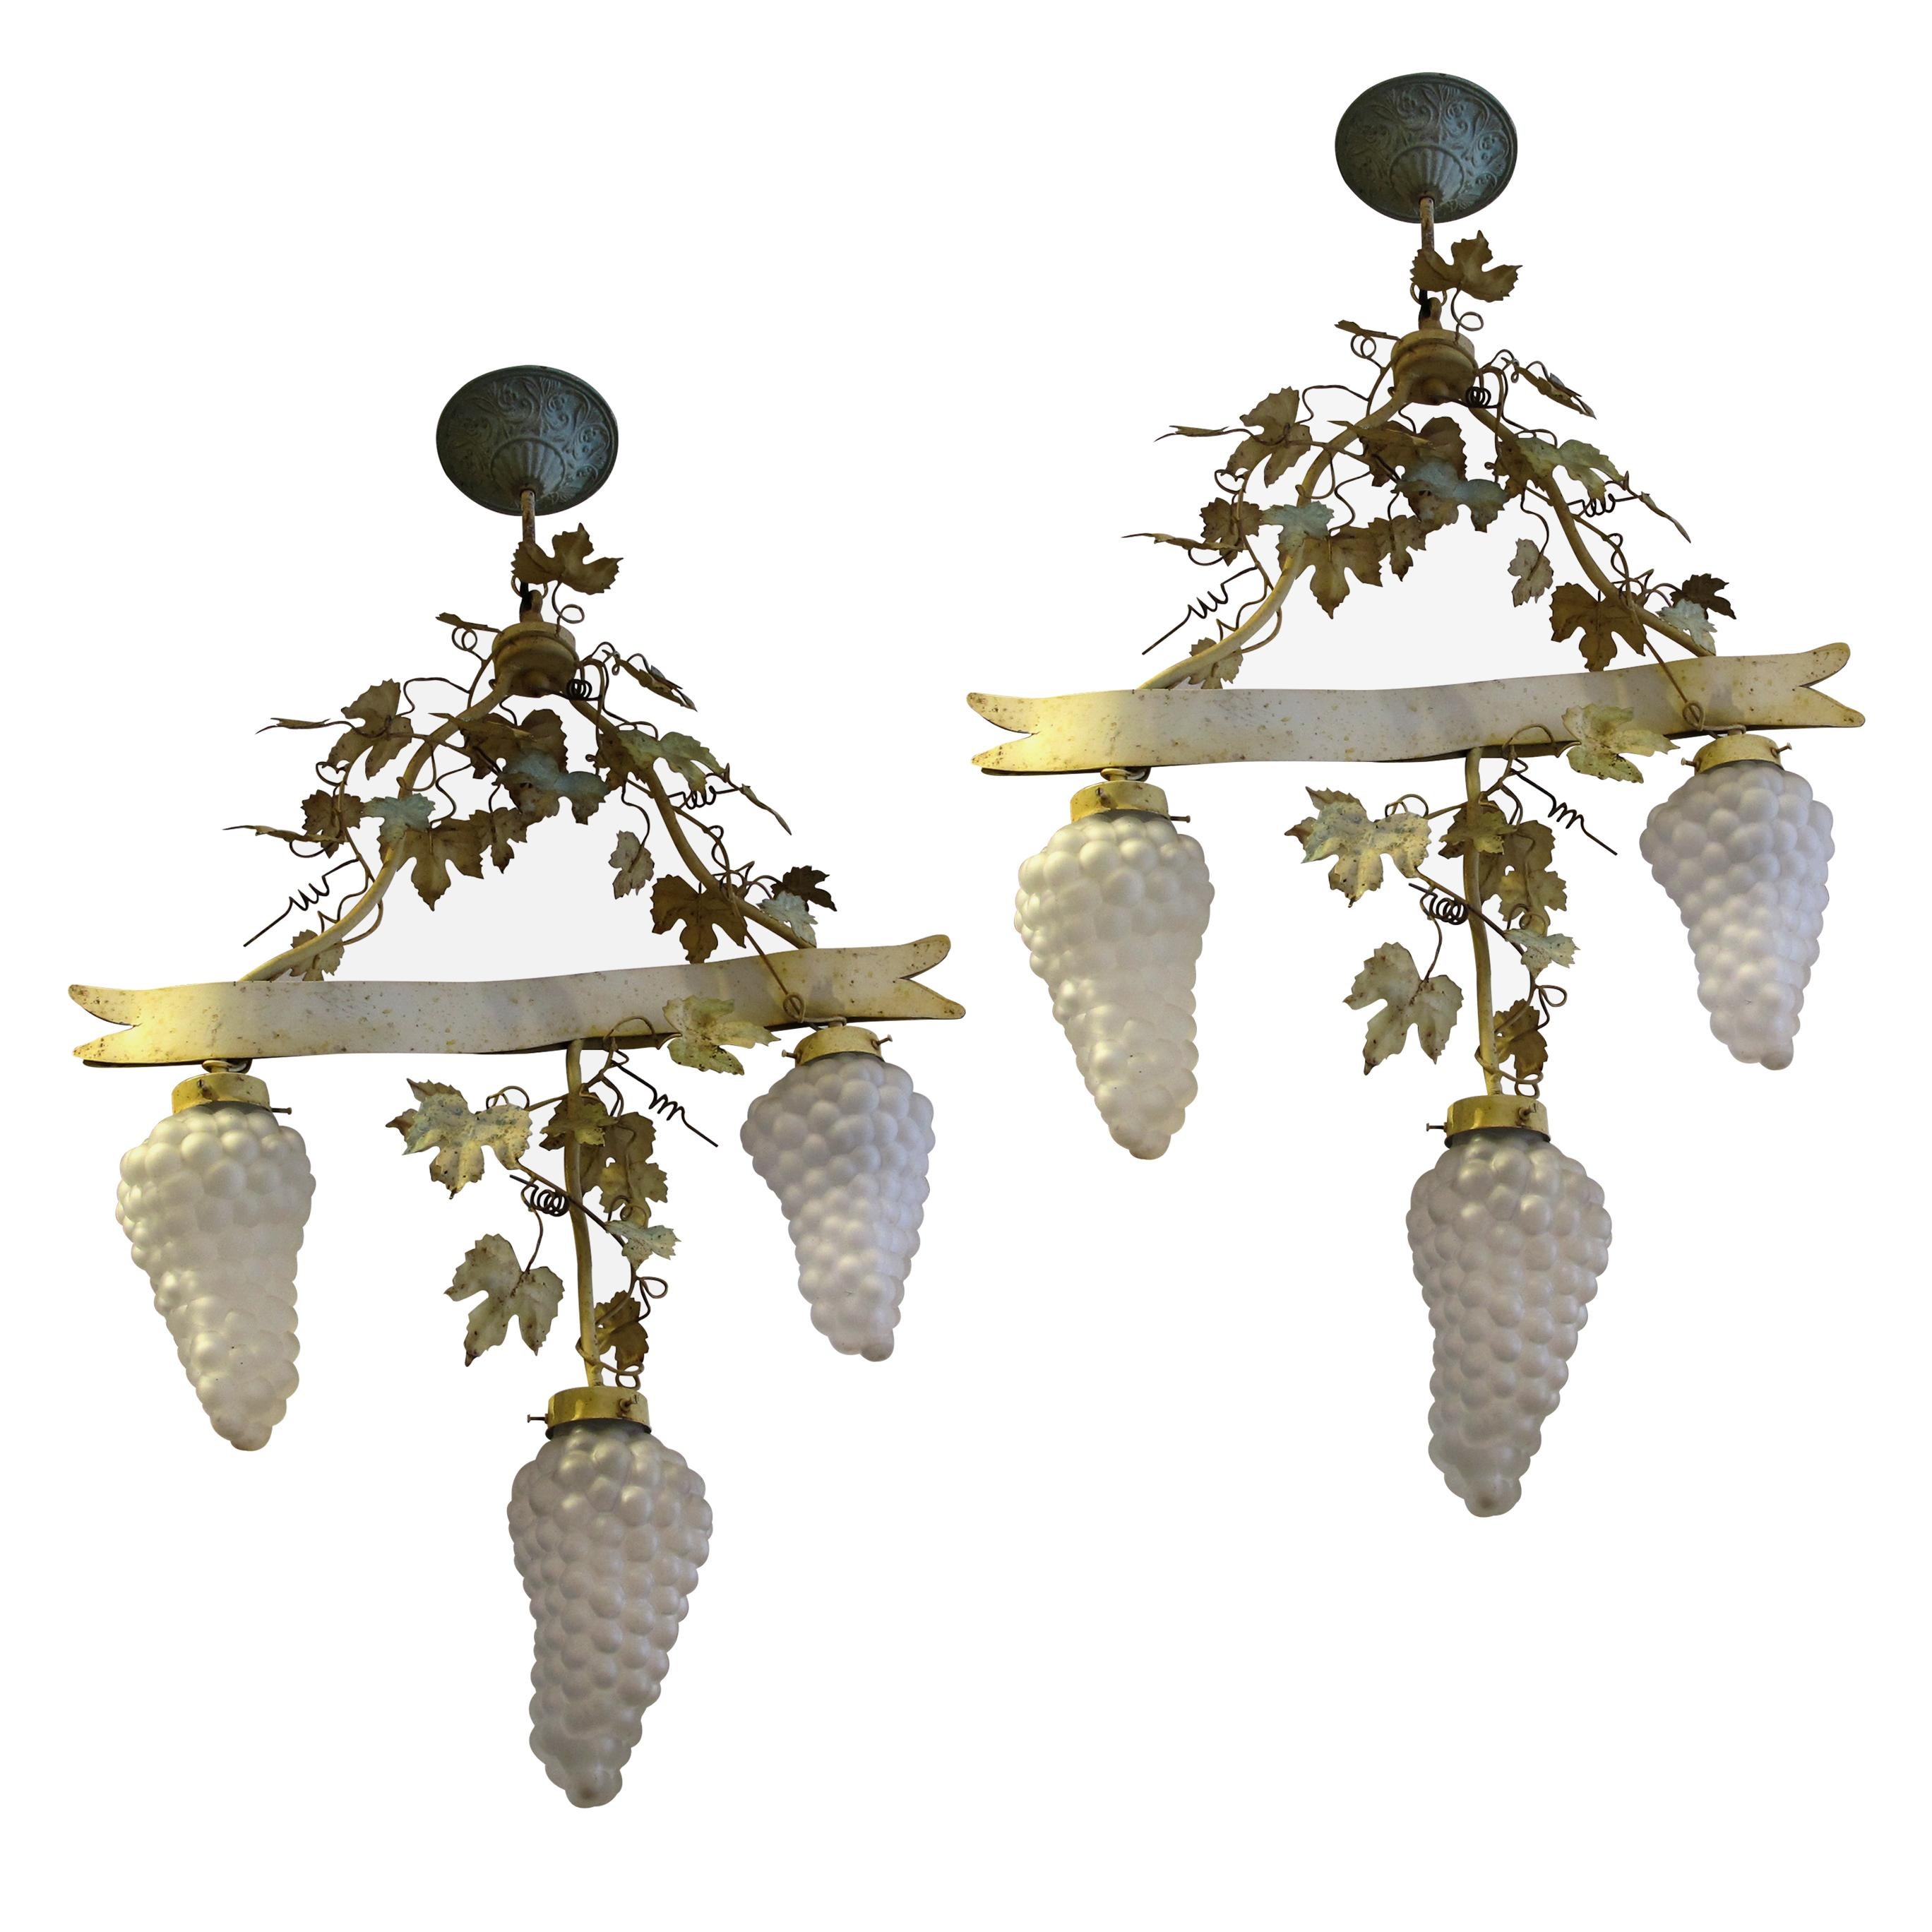 Highly decorative mid-century French pair of toleware hanging lights with foliage and grapevine-shaped glass shade. The lamps have acquired a beautiful patina over the years, their organic look will be ideal for a cellar or a conservatory. The